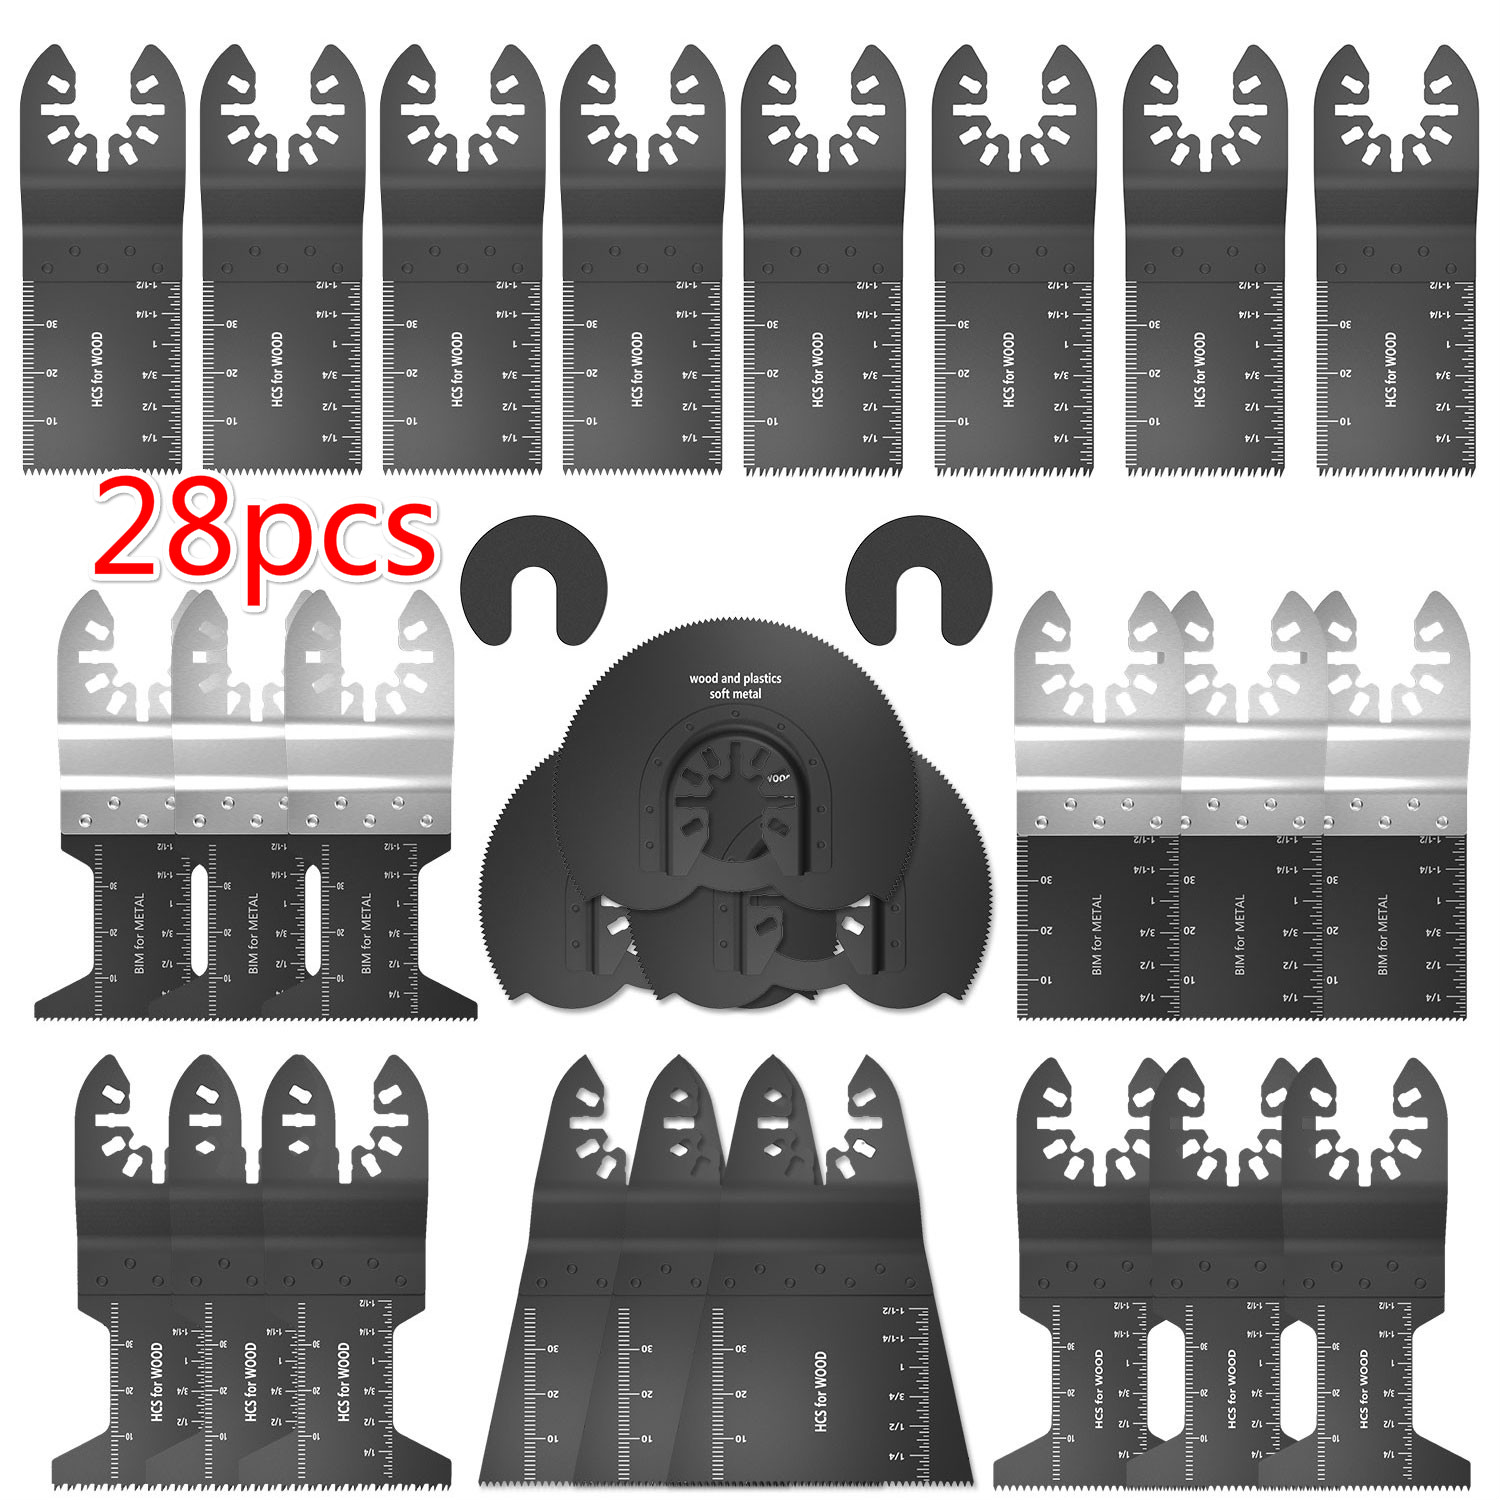 28pcs Multi-Function Saw Blades High Carbon Steel Precision Oscillating Multitool for Cutting Diy Wood Power